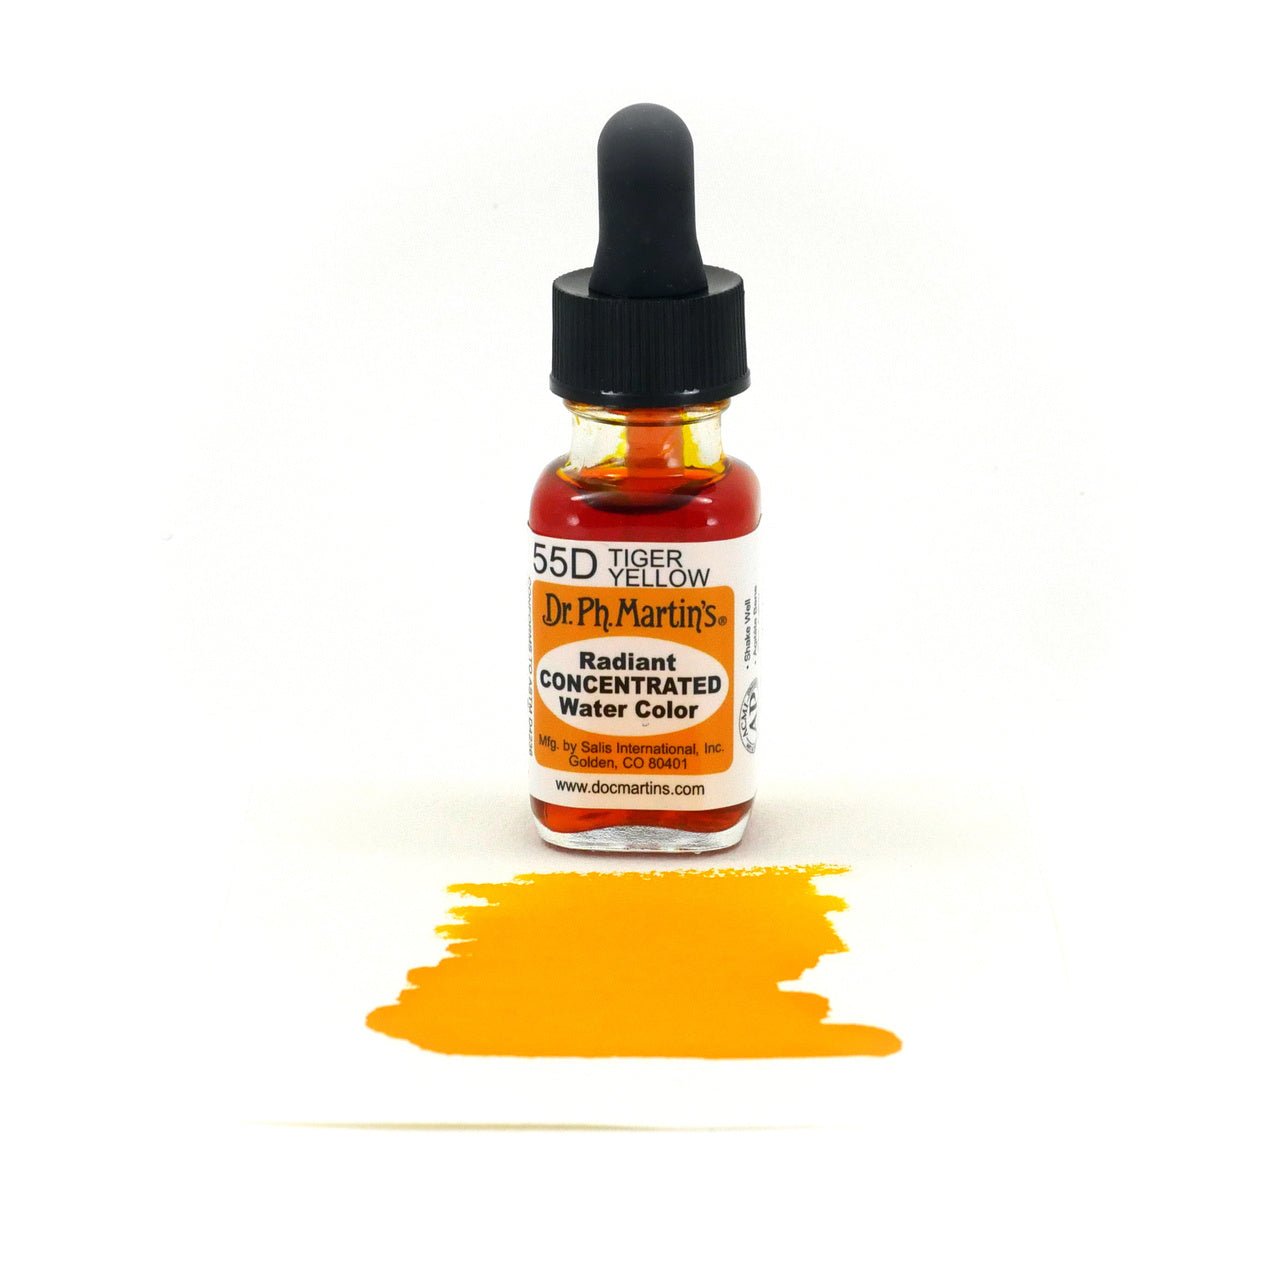 Dr. Ph. Martin's Radiant Watercolor .5 oz - Tiger Yellow - merriartist.com